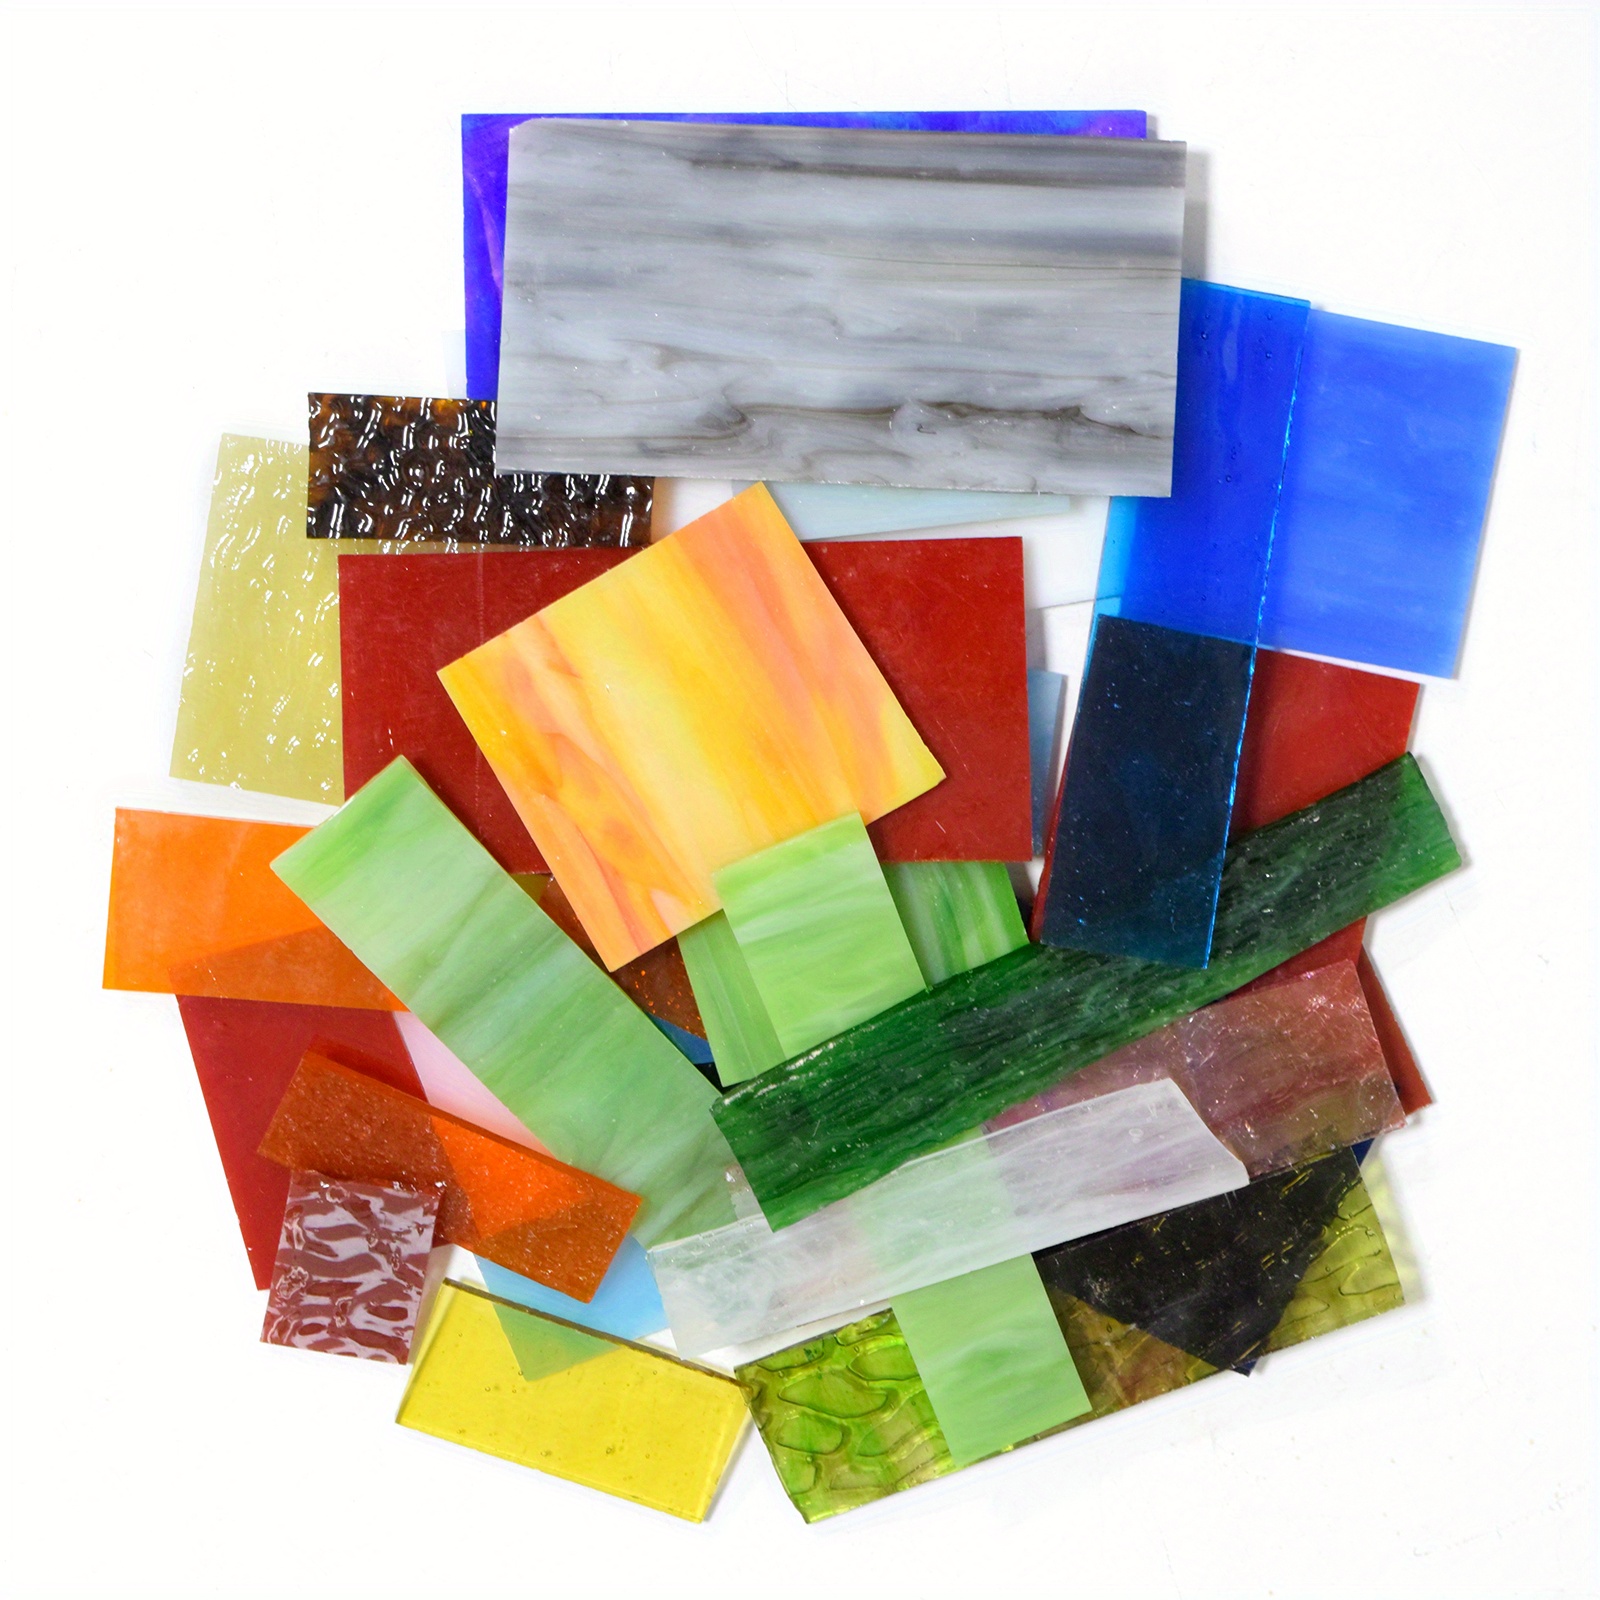 Stained Glass Shards Five Shapes Mixed Colorful Mix And Match Diy